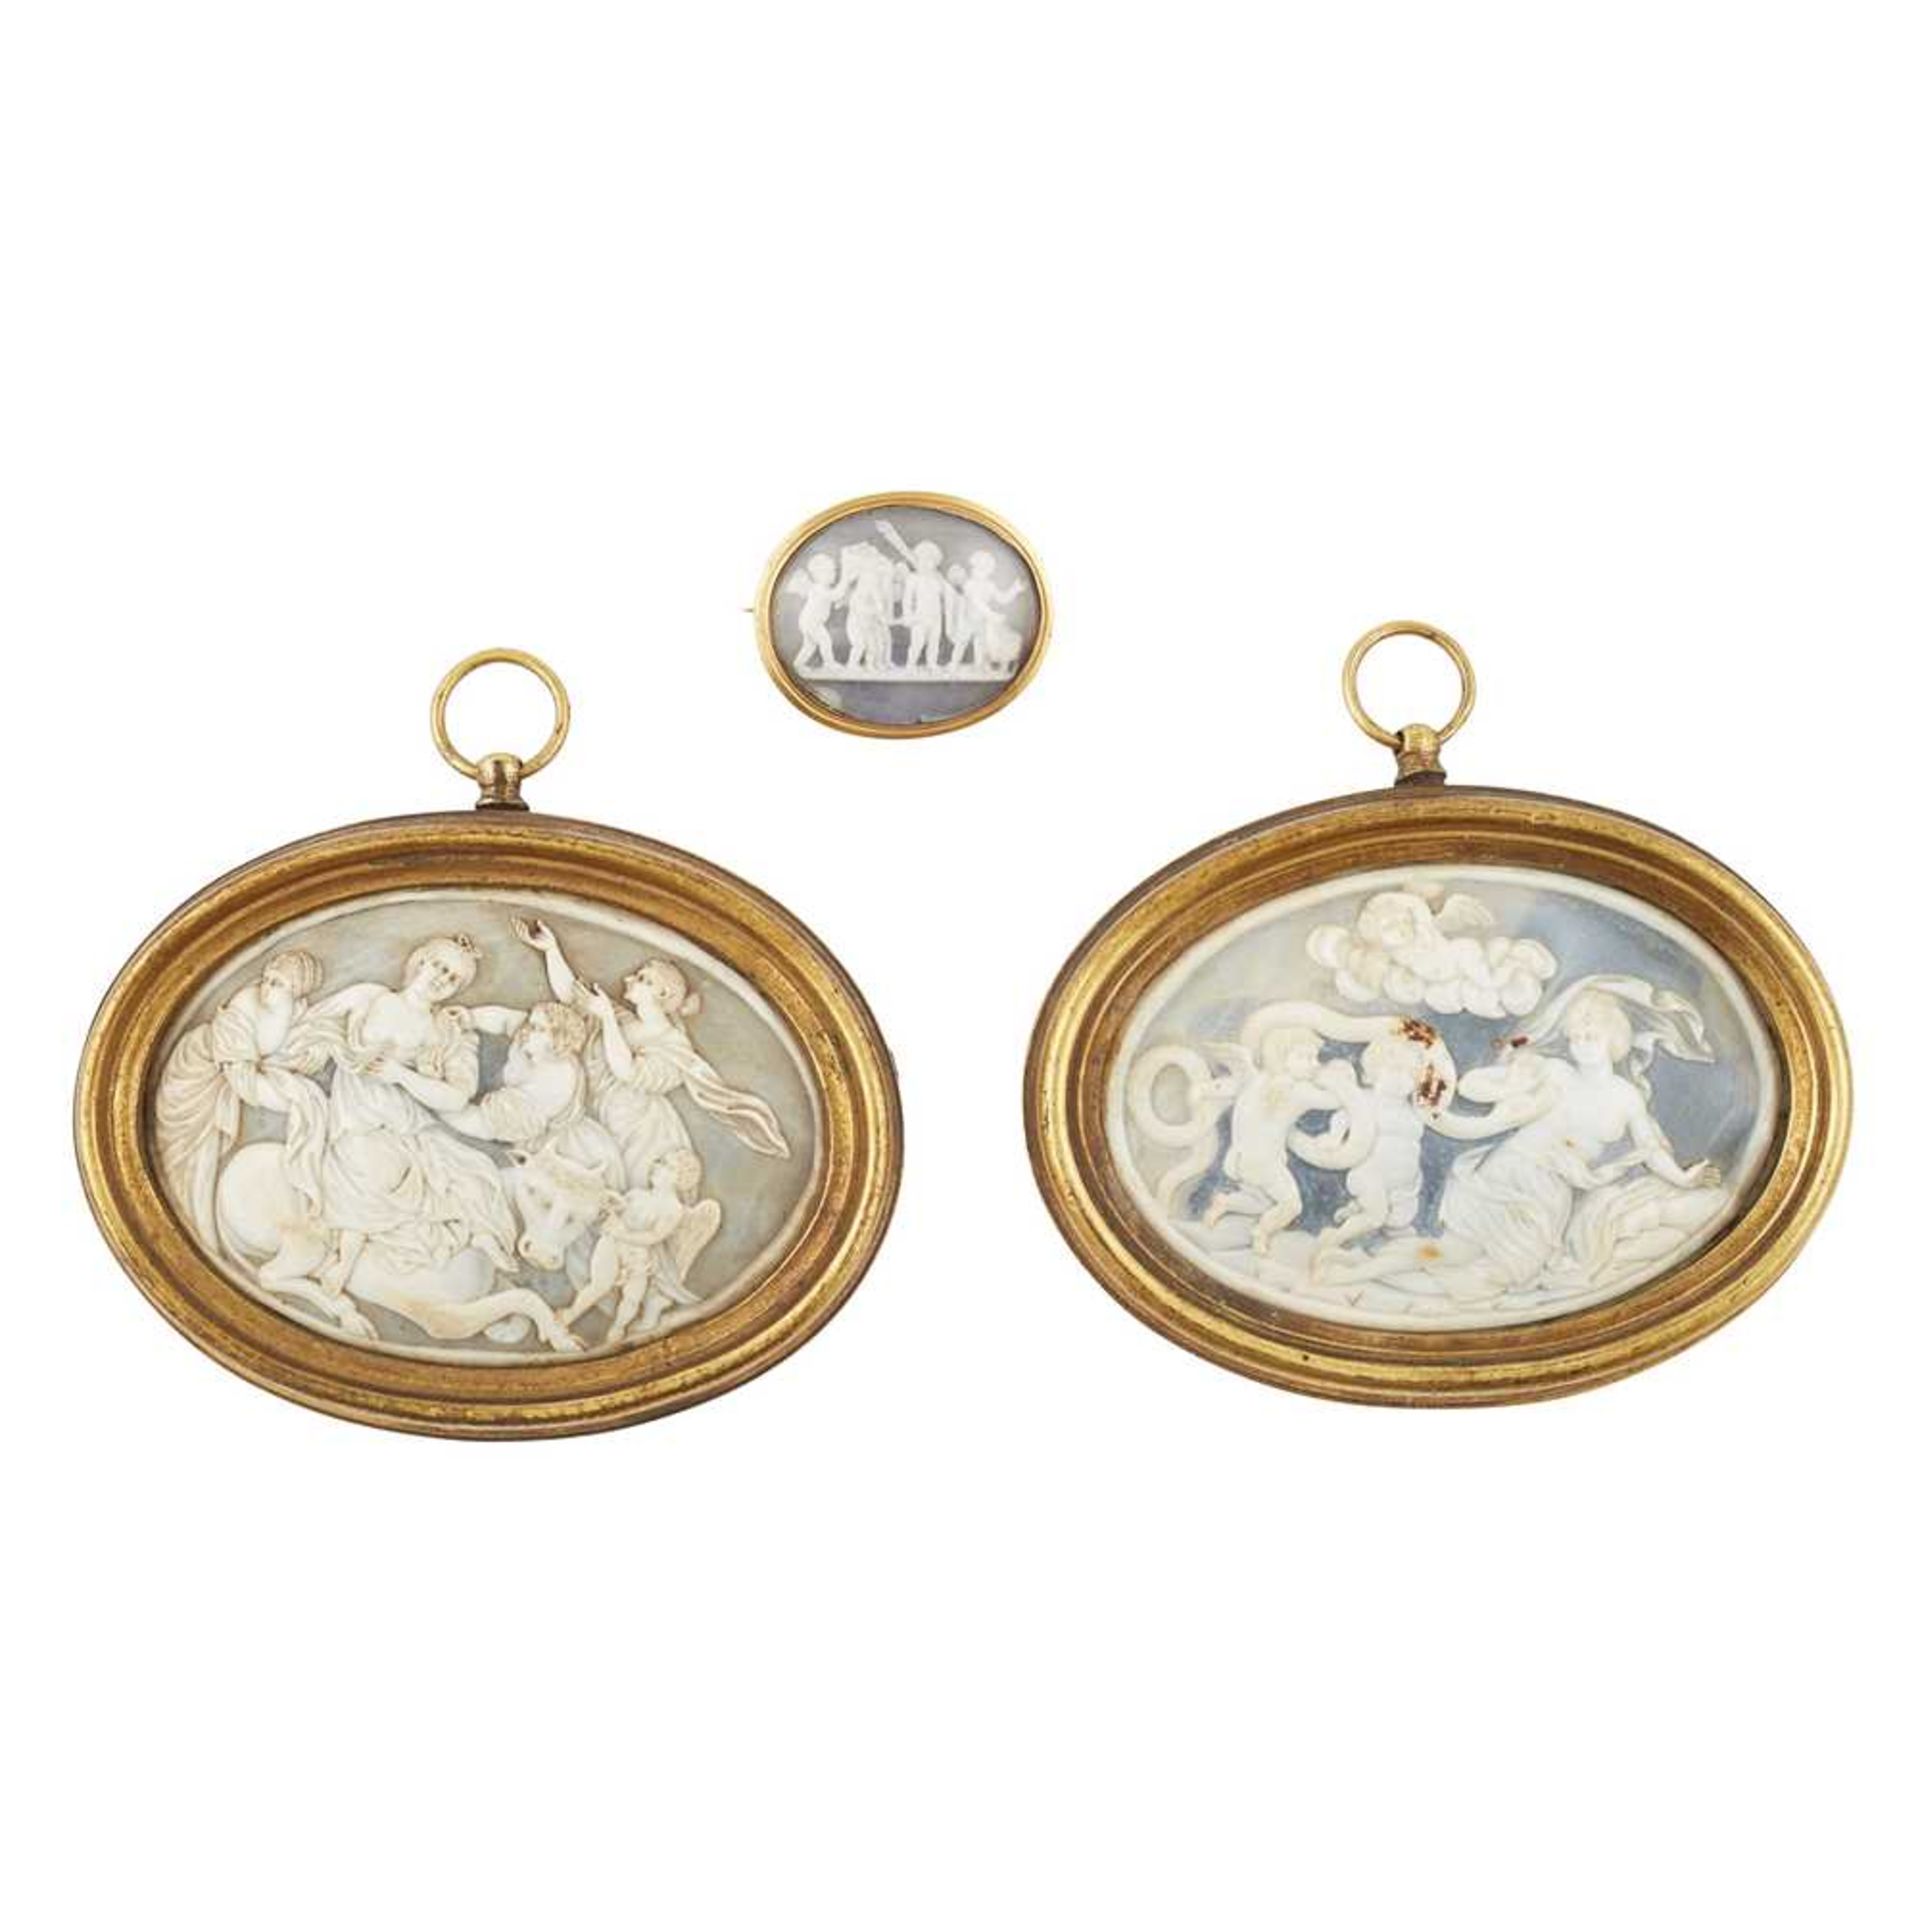 TWO SHELL-CARVED CAMEOS 18TH CENTURY